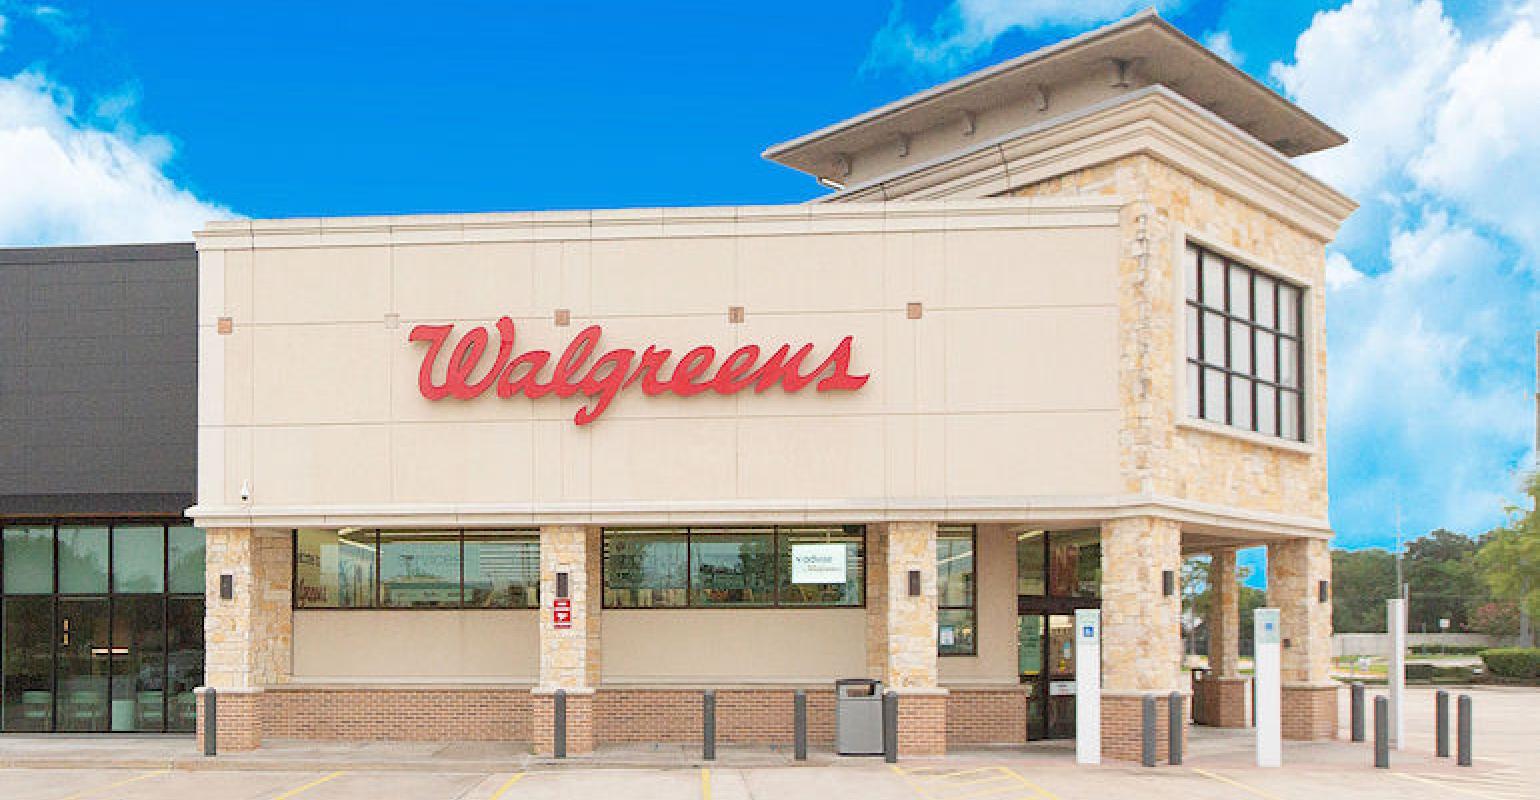 Does Walgreens Take Apple Pay?